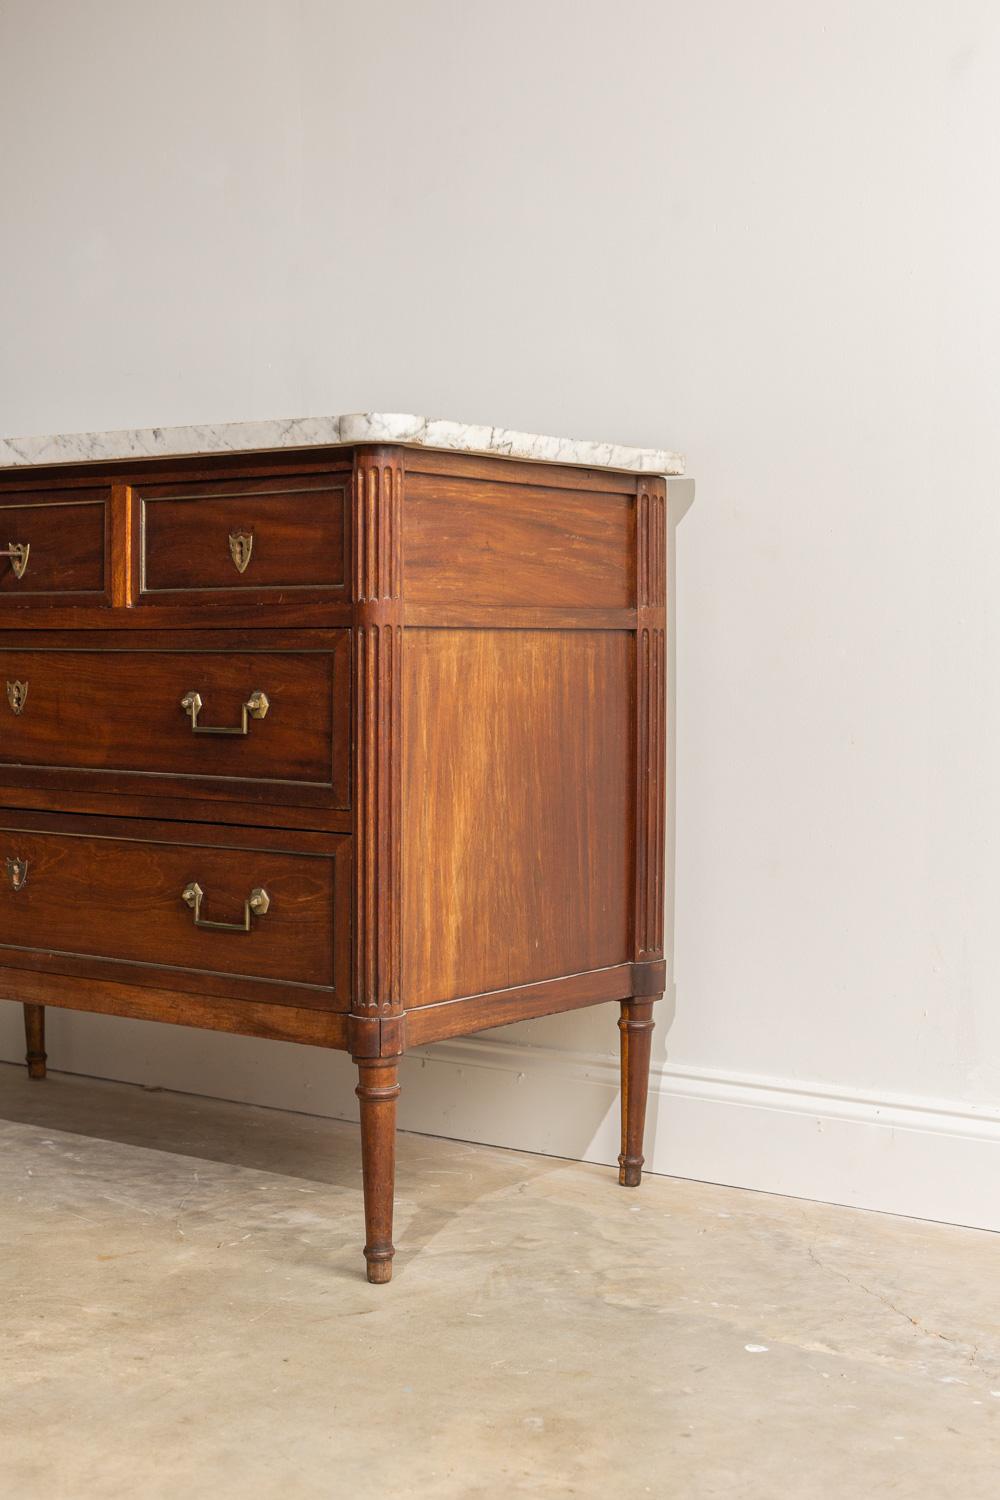 This Louis XVI Walnut commode is a truly stunning stained piece with original bronze hardware and working lock and key. The dark stain contrasting with the cream colored marble top gives this piece a beautiful moody feel. It was manufactured in 1850